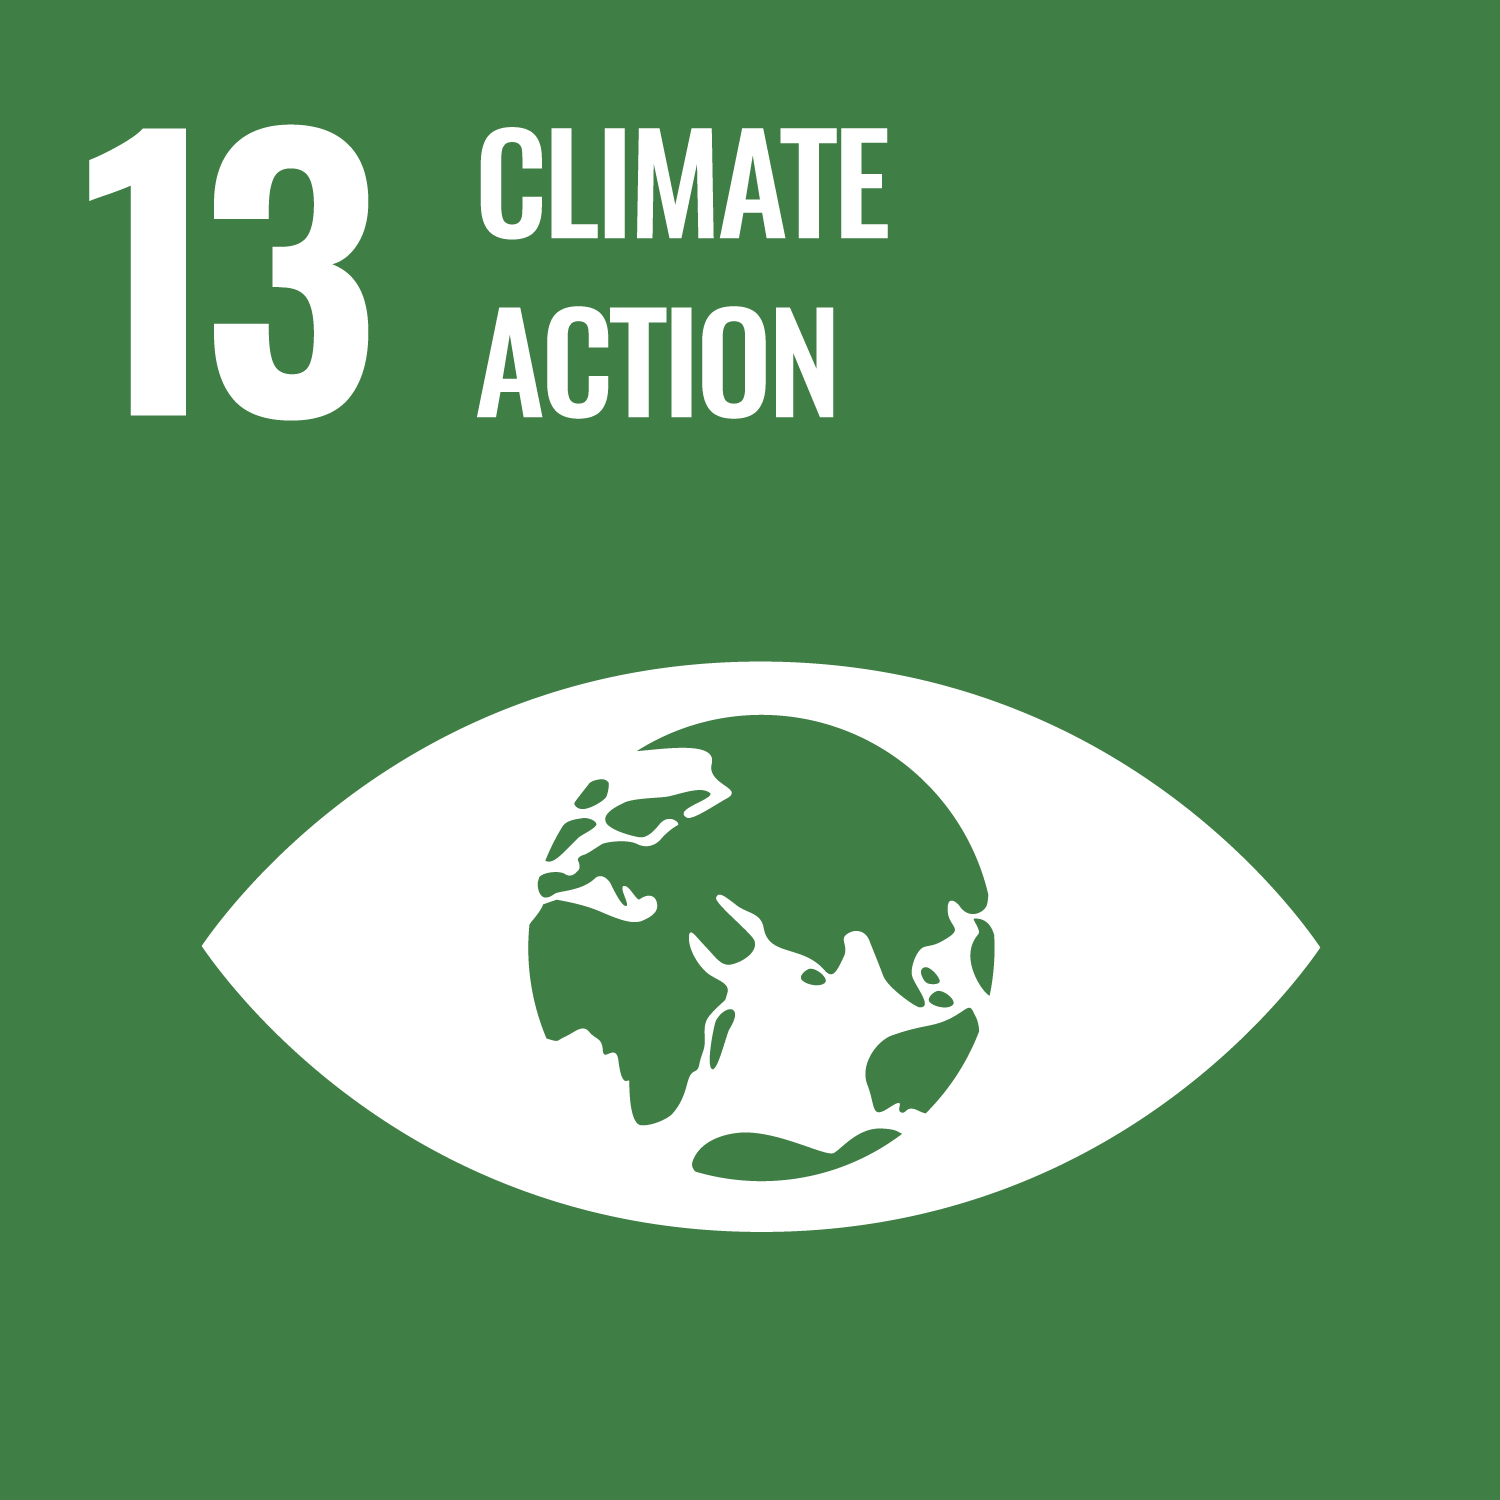 Sustainable Development Goal 13 – Climate Action